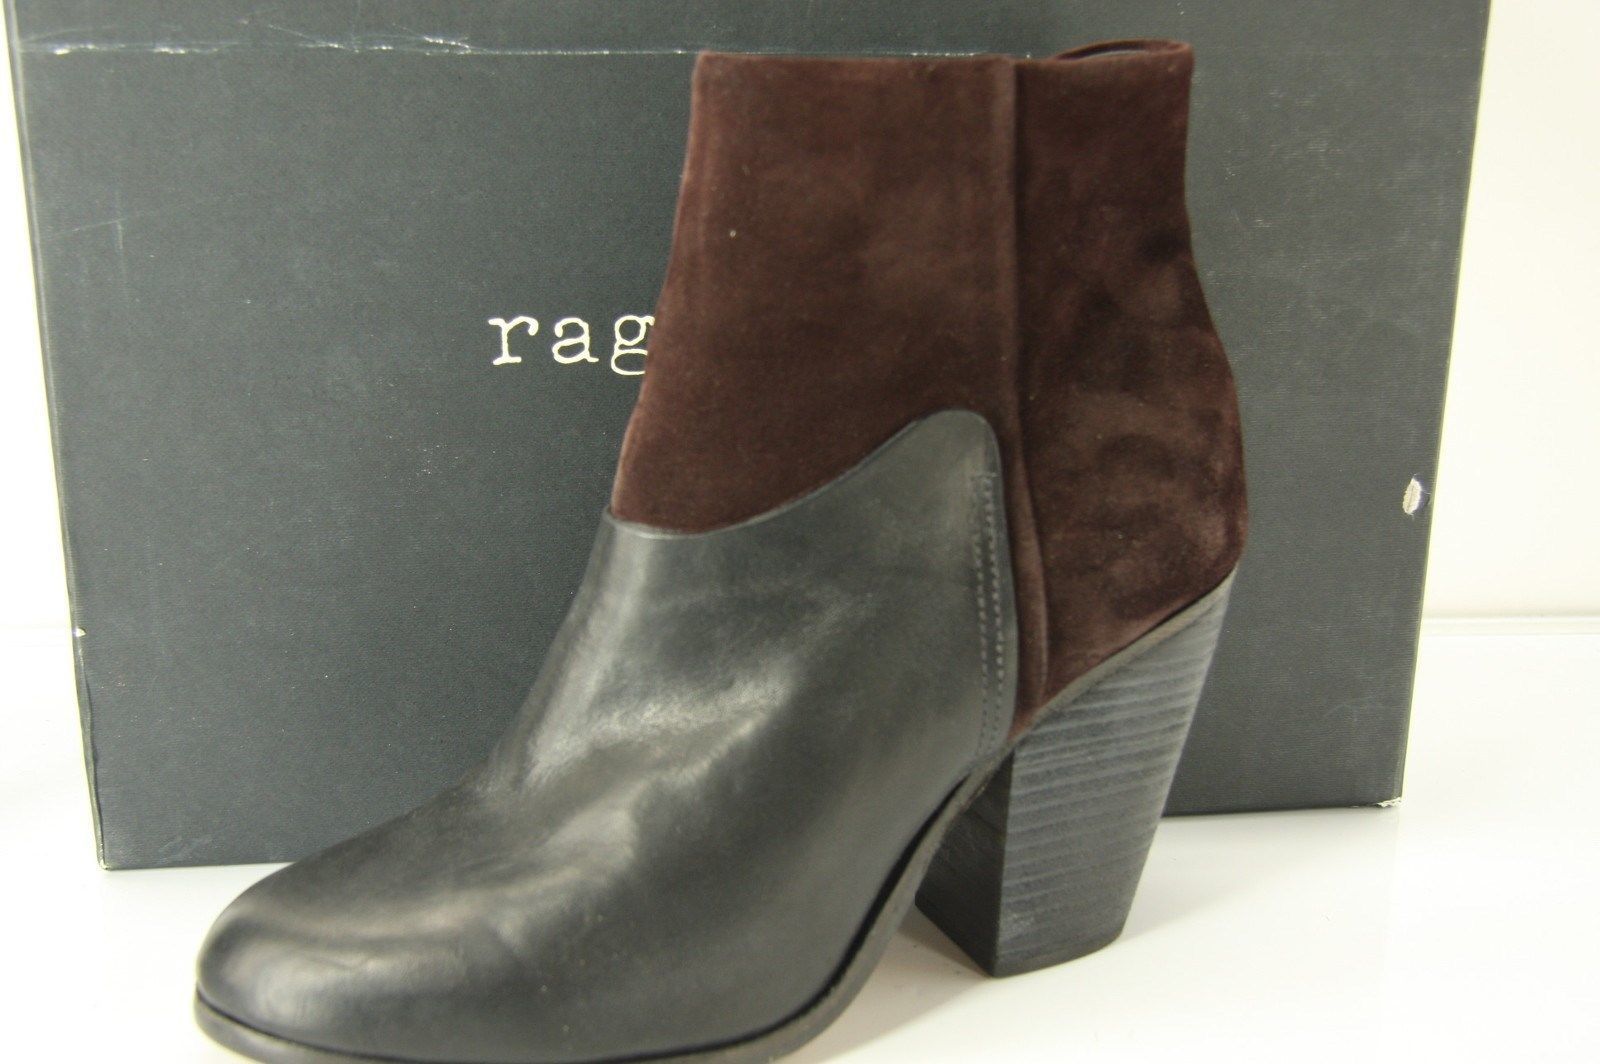 Rag & Bone Kendall Suede Leather Block Heel Ankle Boots size 40 10 NIB $550